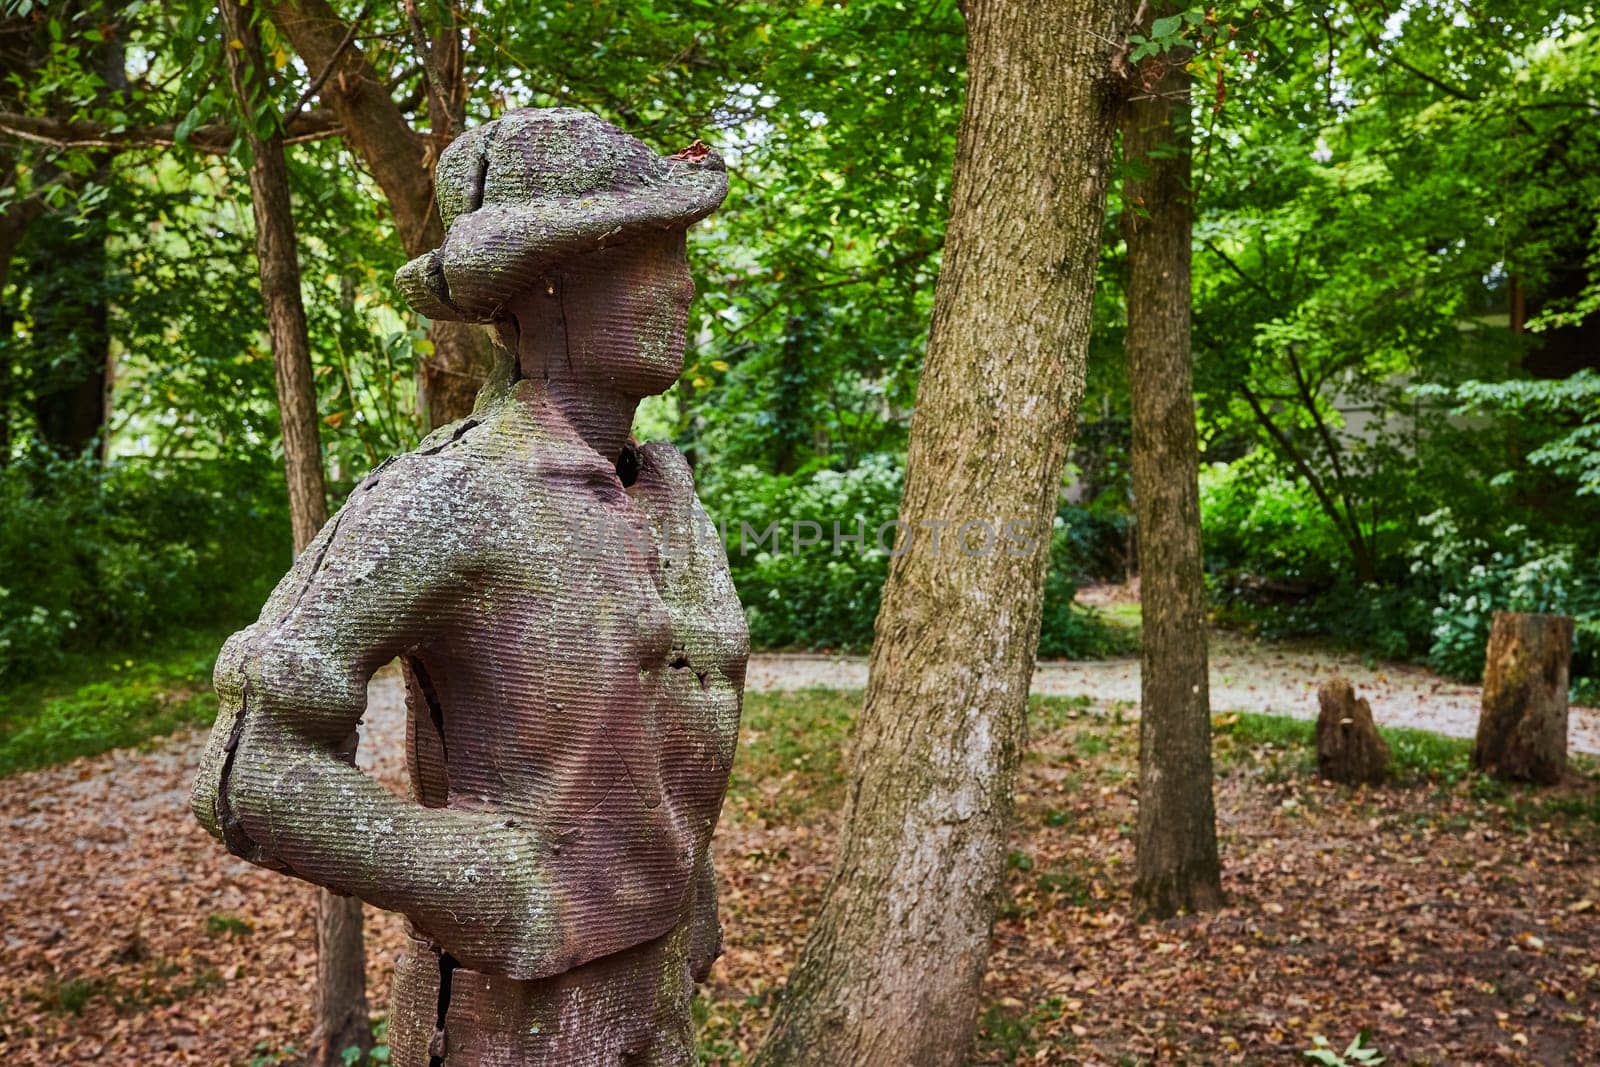 Textured sculpture of reflective figure in serene woodland setting at Art Center, Indianapolis, Indiana, 2023